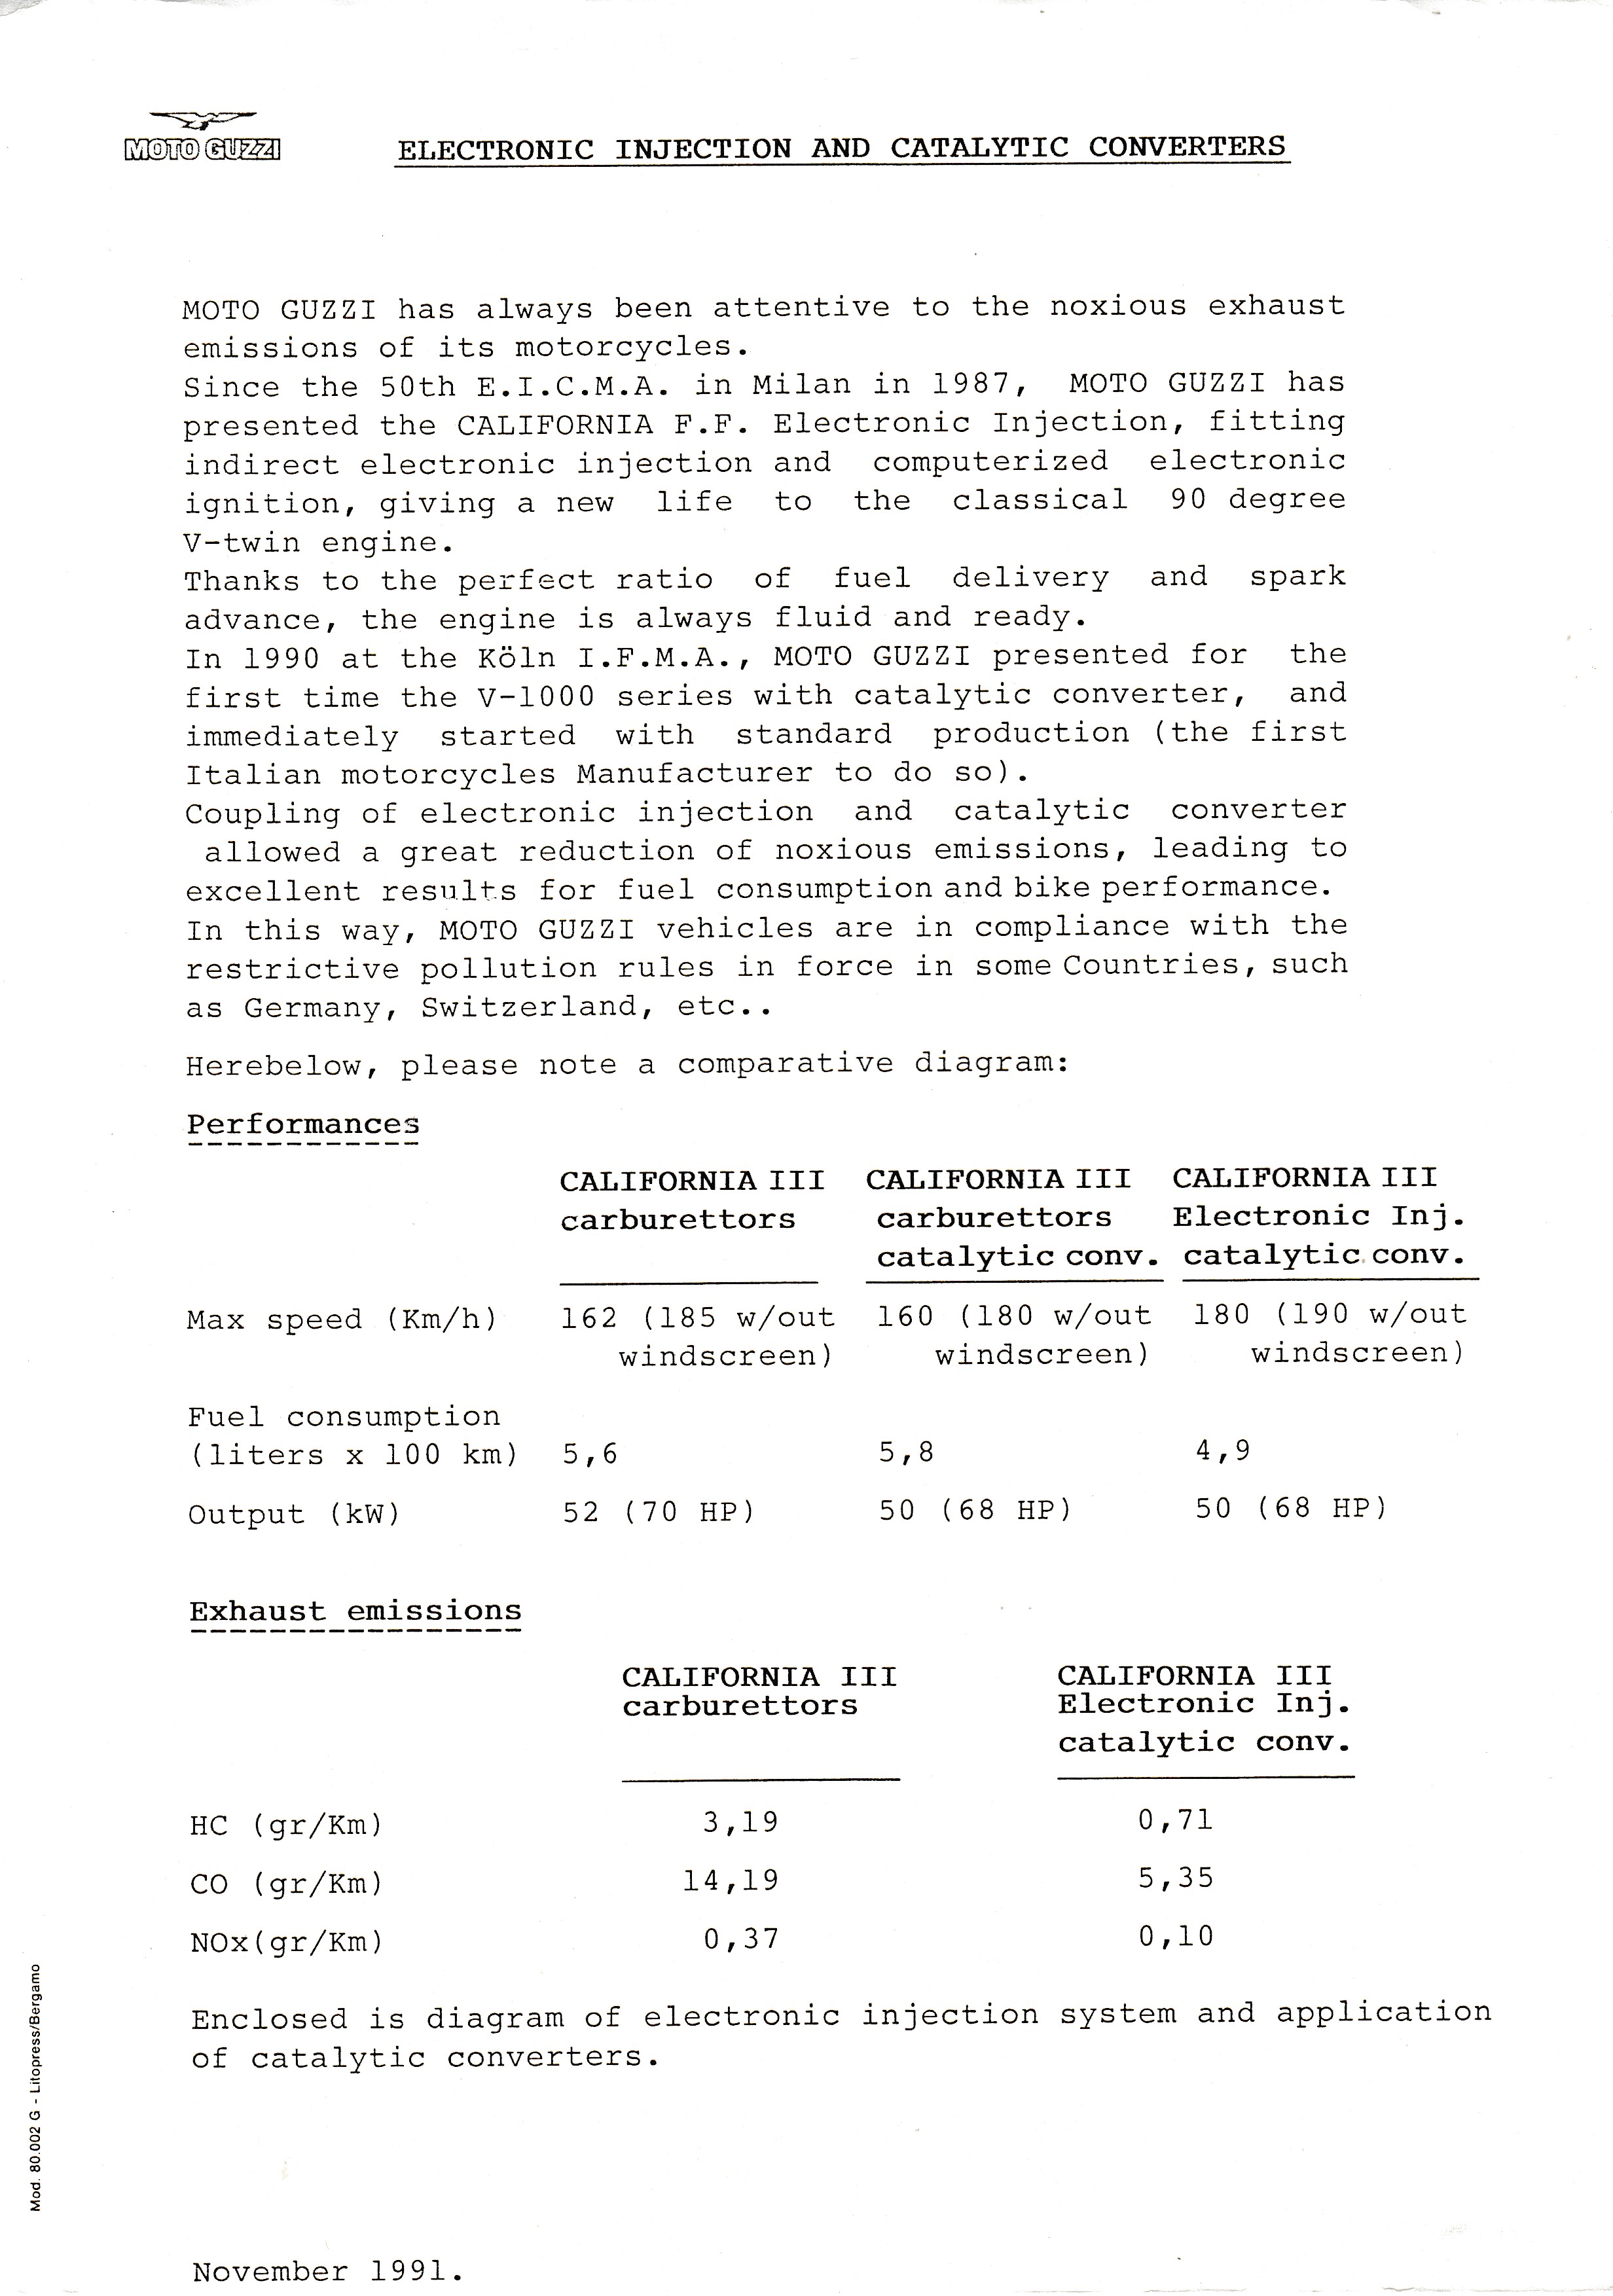 Press release - Moto Guzzi electronic injection and catalytic converters (1991 November)